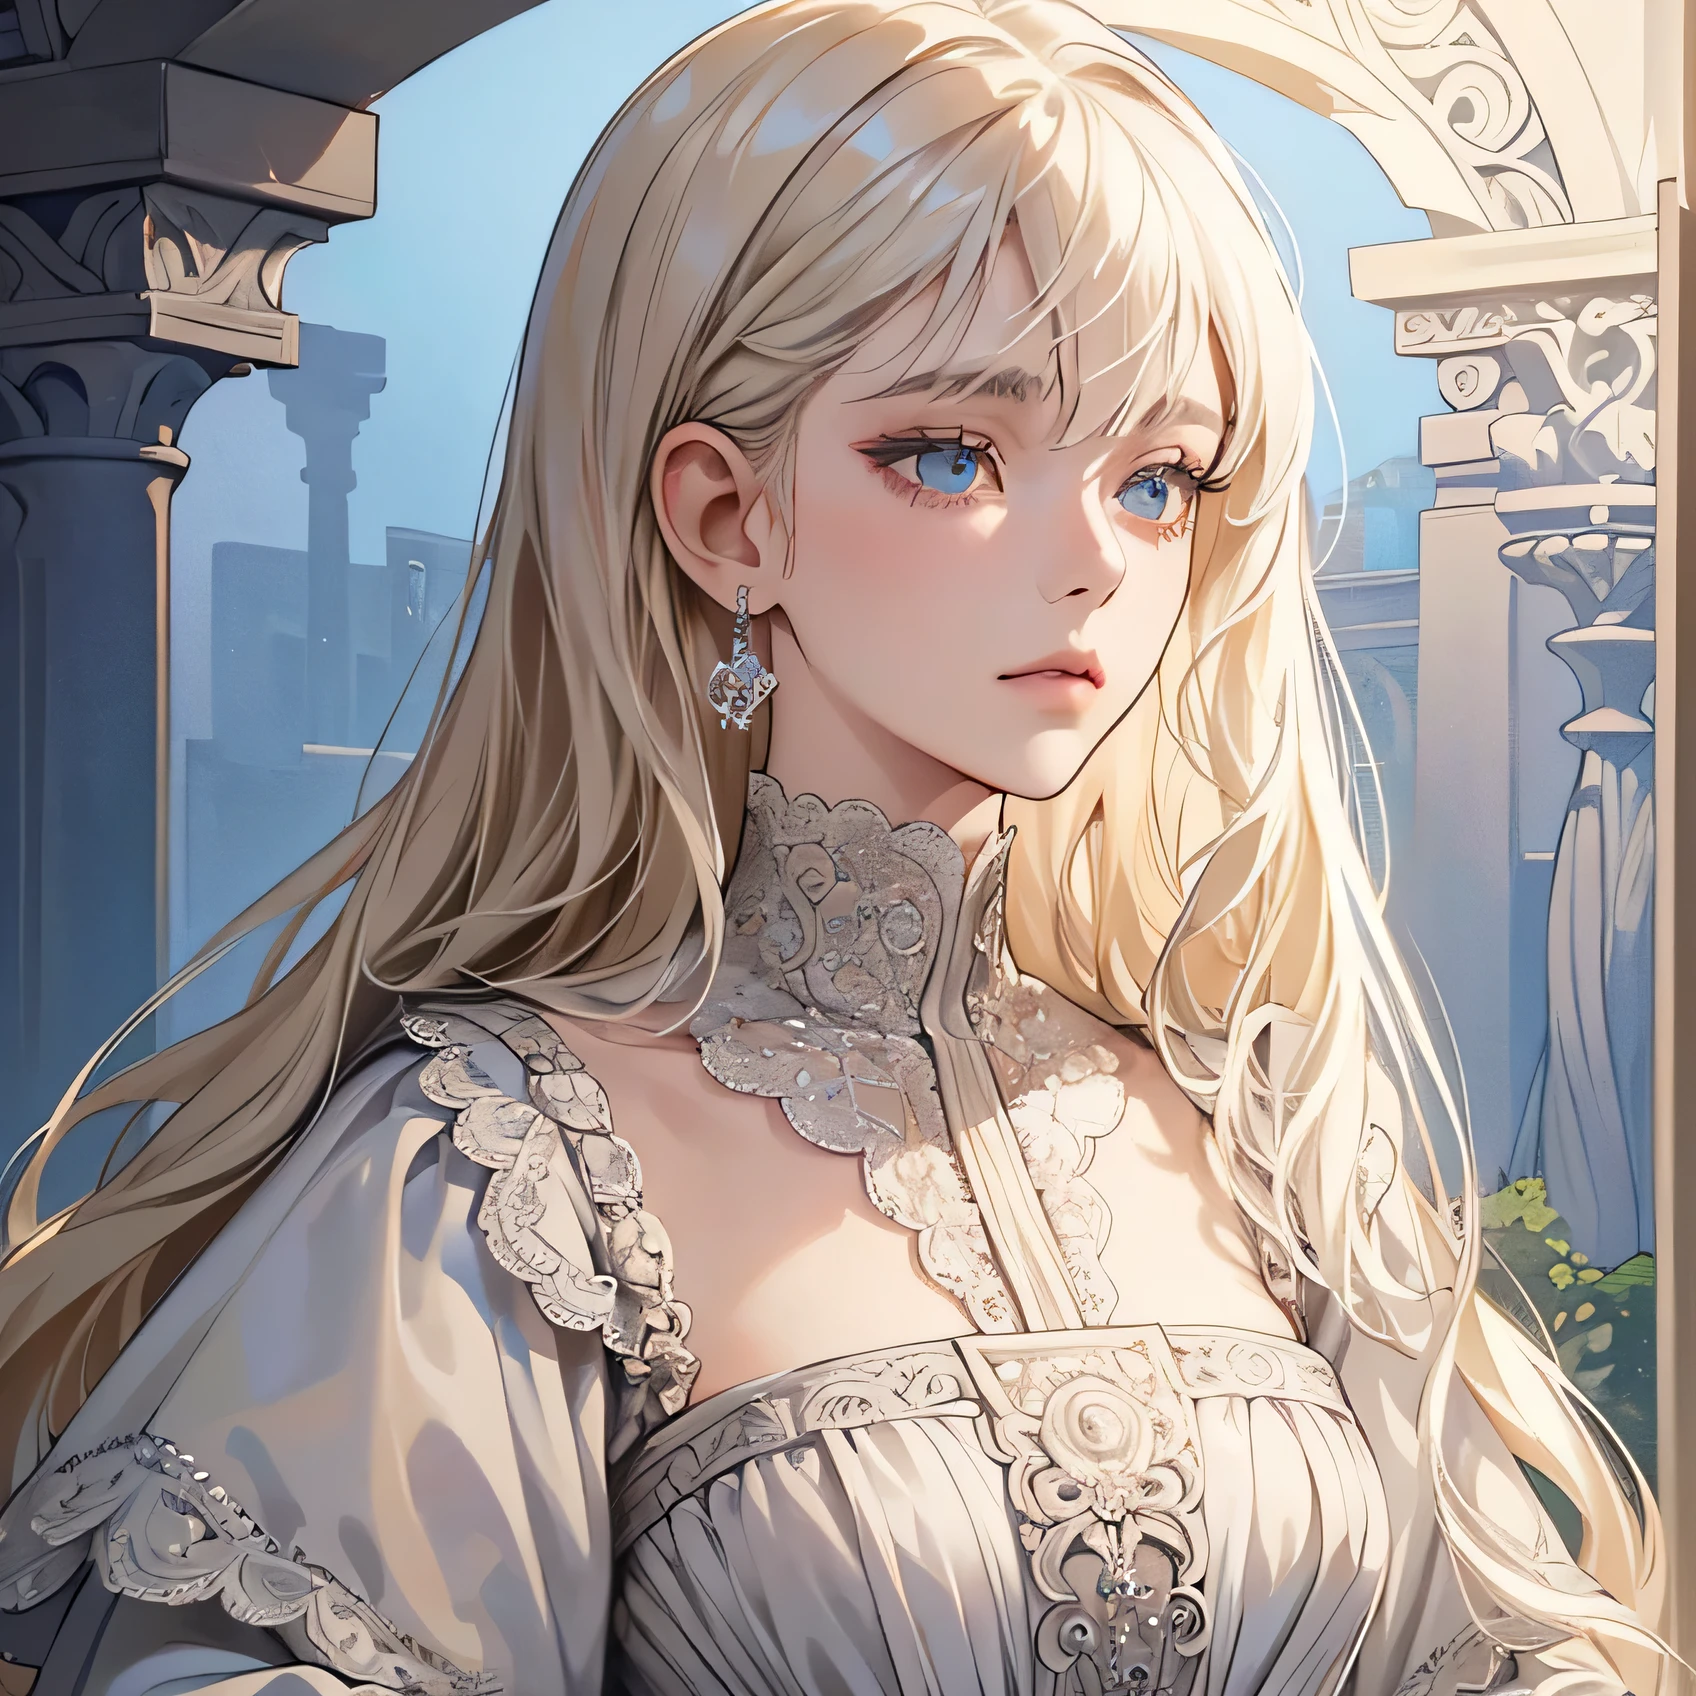 (extremely delicate and beautiful:1.2), 8K,(masterpiece:1.0),(best_quality:1.0), 1 girl, and intricate detailing, Enlarged textures, and intricate detailing, finely eye and detailed face, and intricate detailing, shiraga, platinum blonde curls long hair, (closed mouths), Perfect eyes, Equal eyes, carolina eyes (A famale god) with white and sliver ancient clothing and blue accessories 